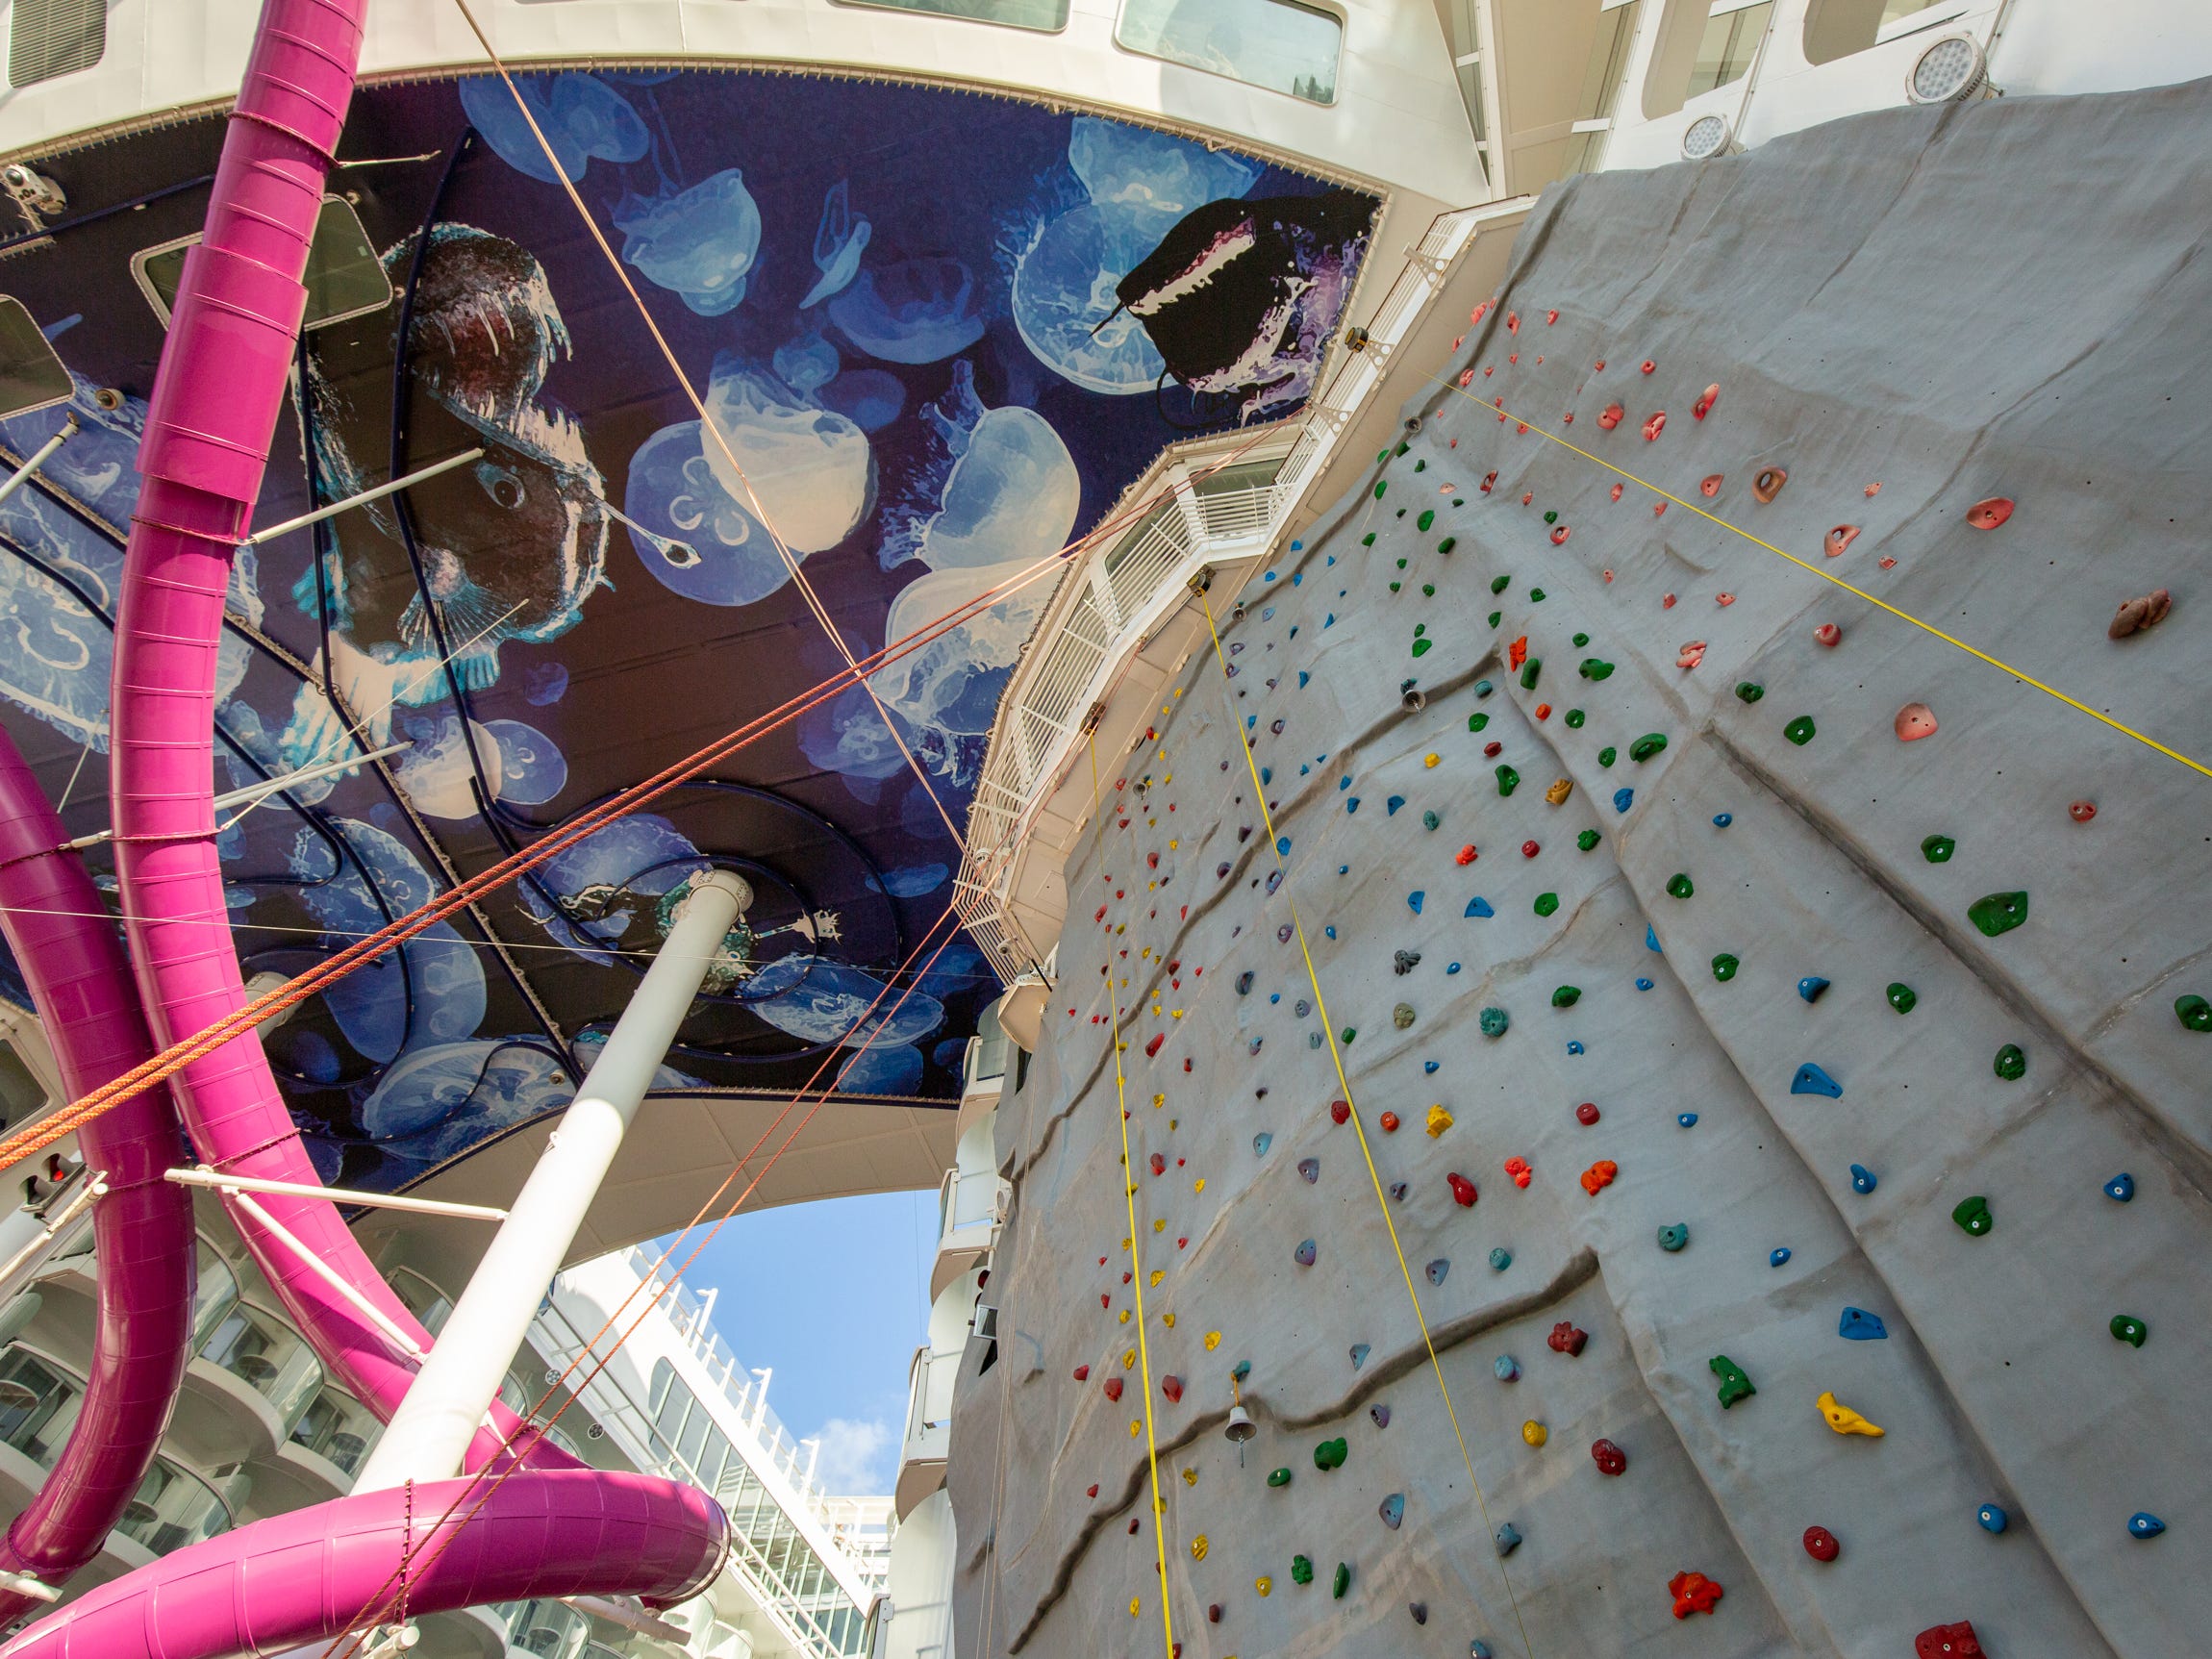 Towards the end of the Boardwalk, two large rock climbing walls frame the Aqua Theater.